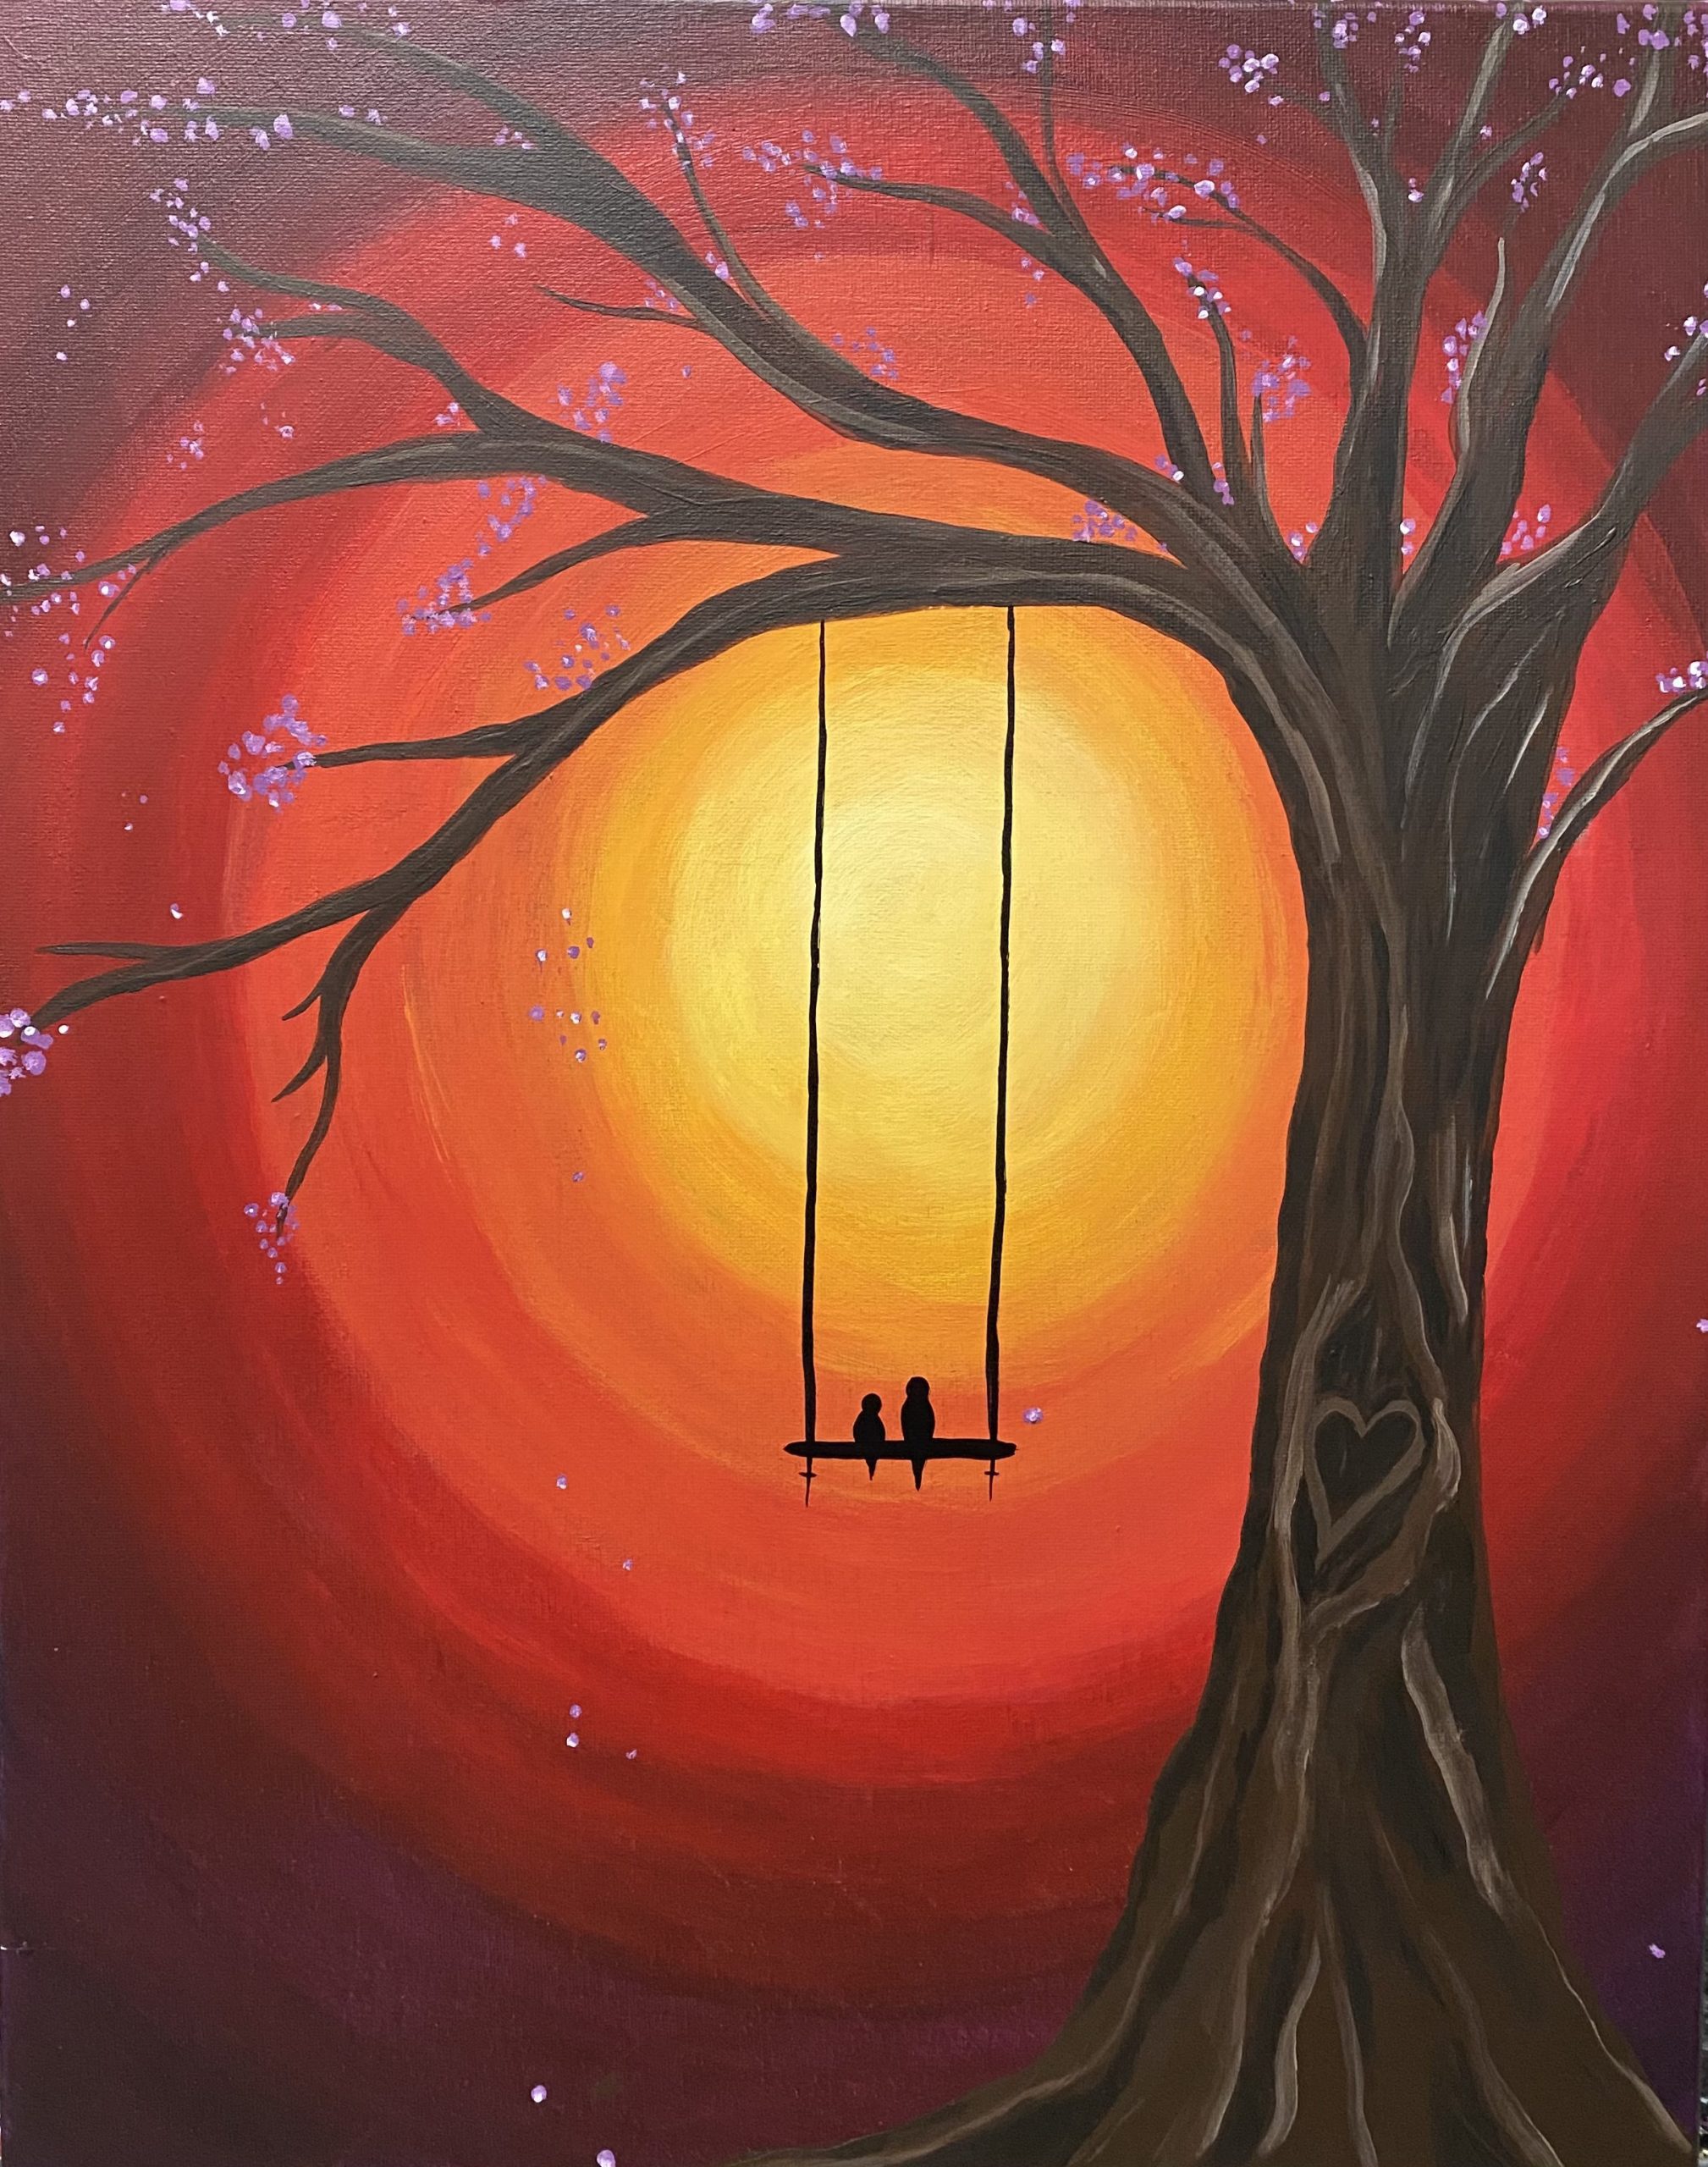 Image of painting called Lovebirds on a swing paint and sip painting event at the Union in Roseville